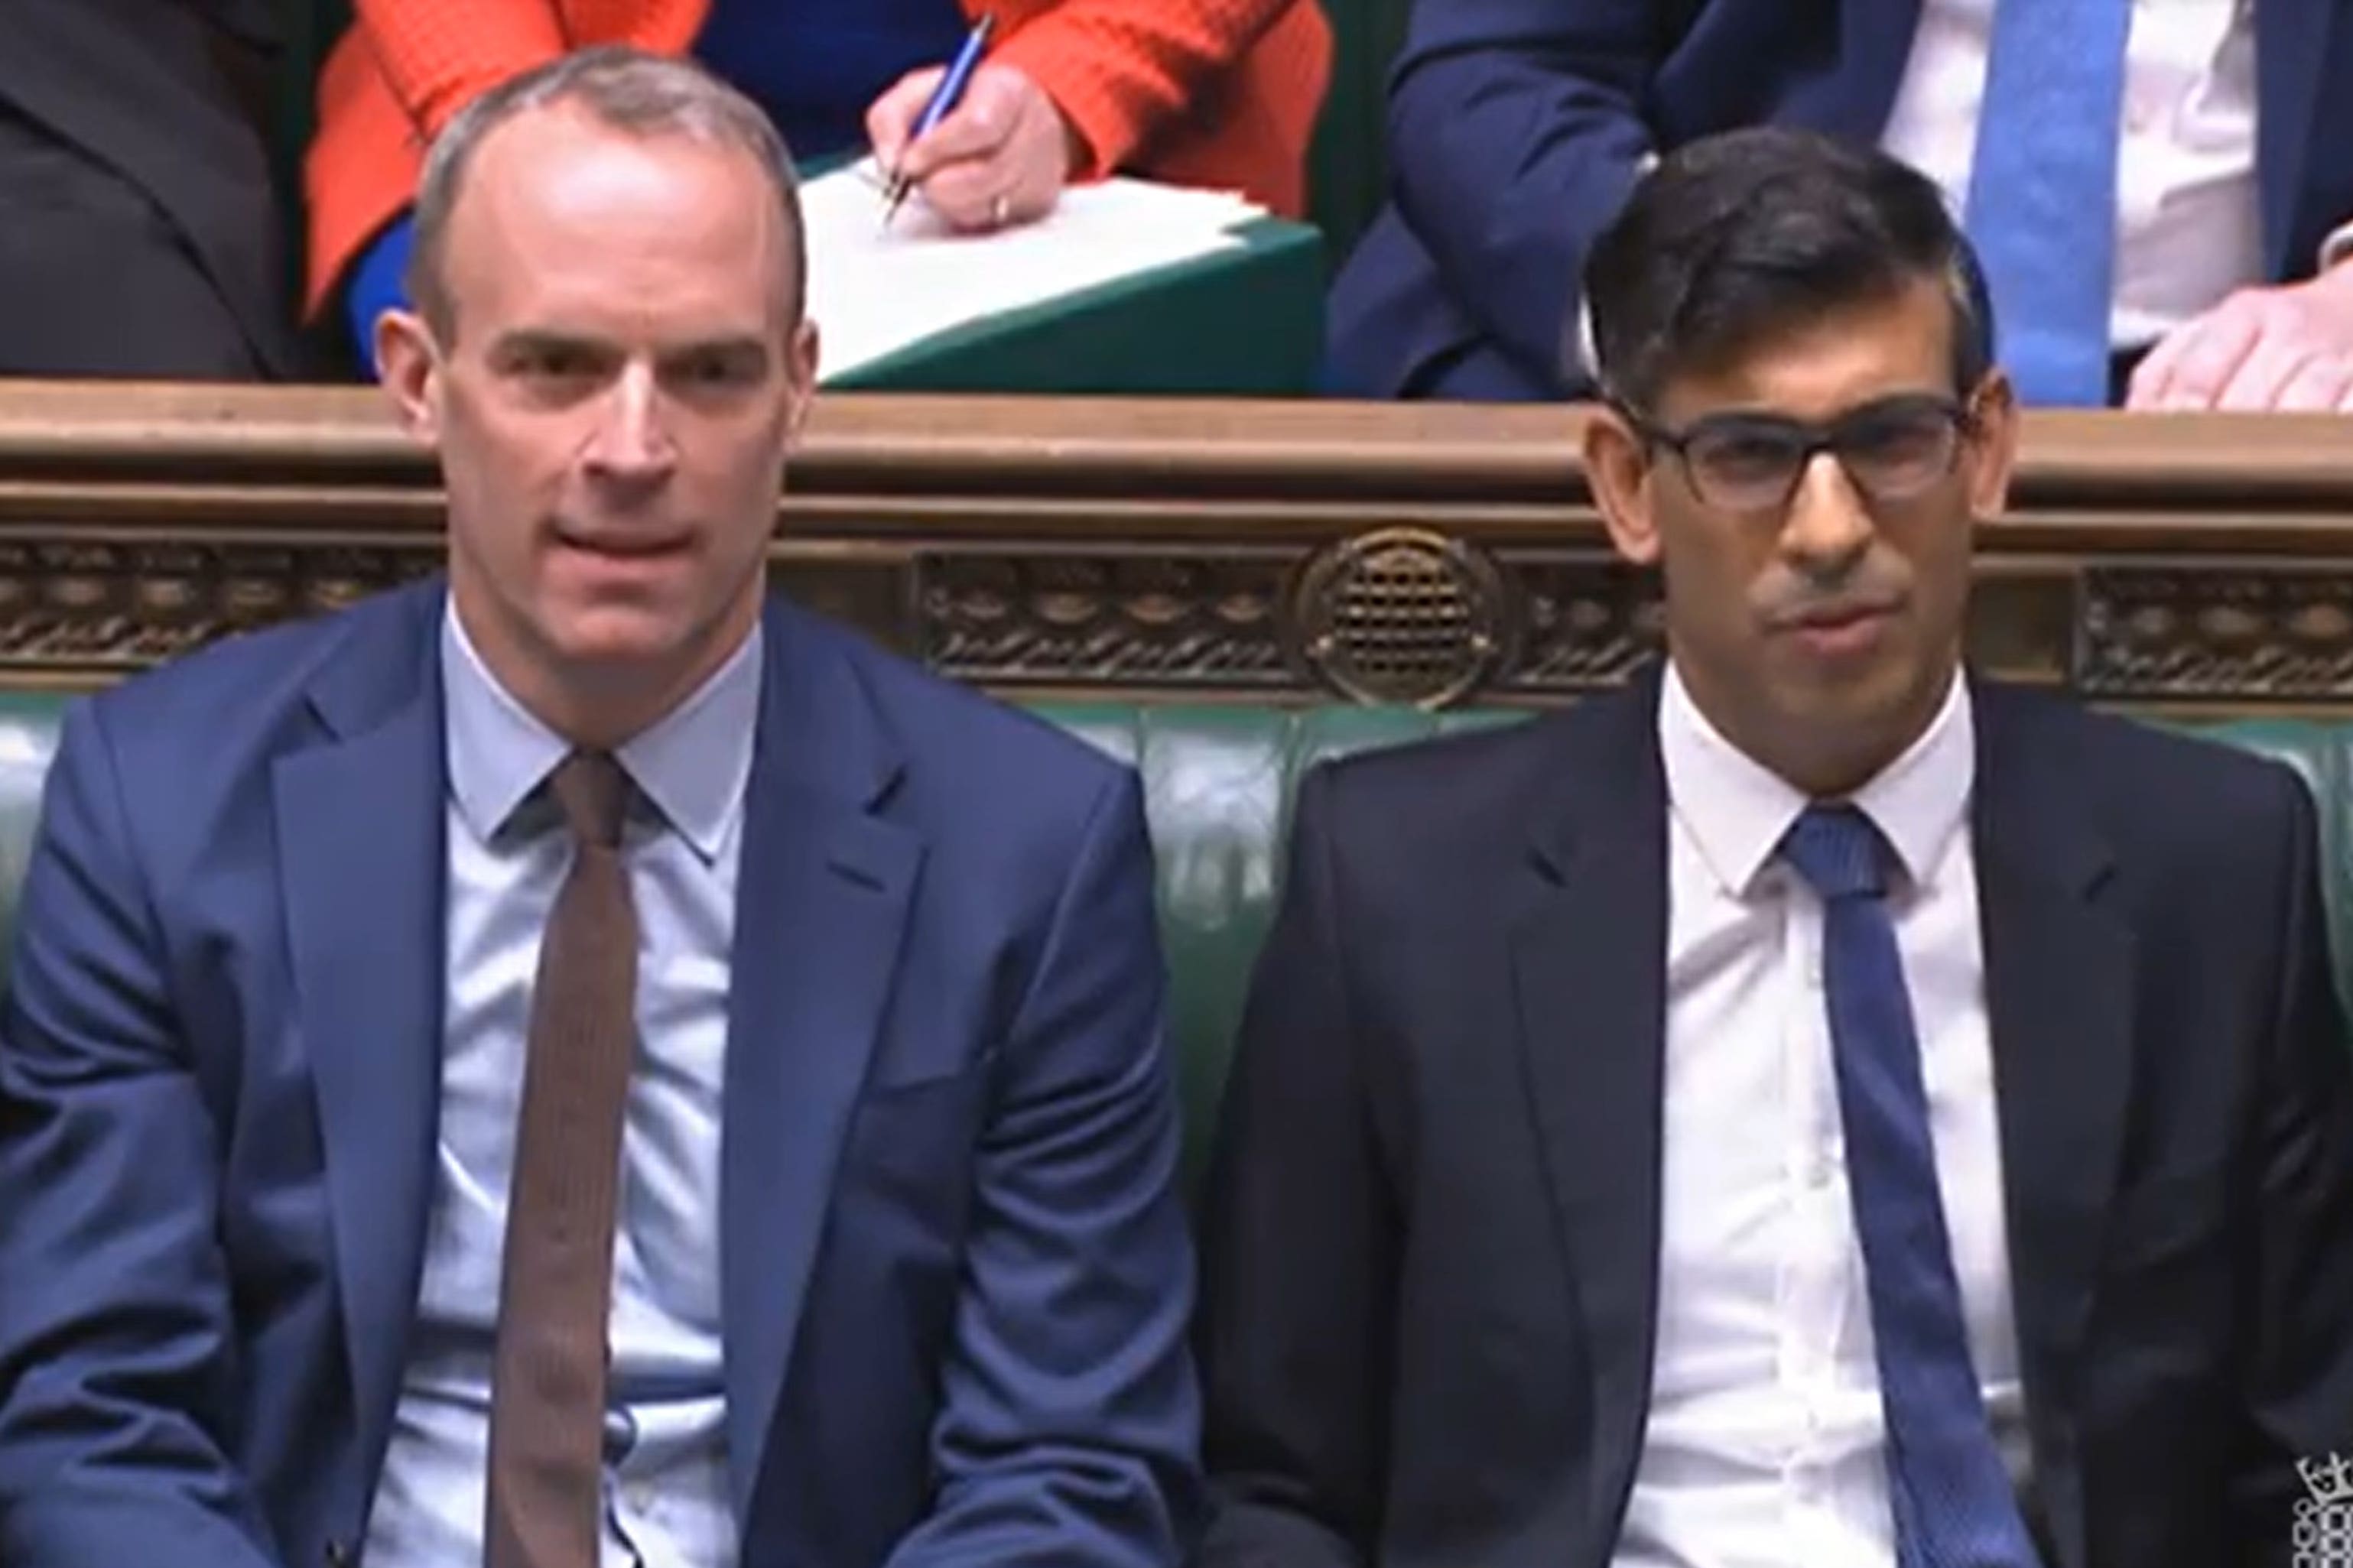 Dominic Raab and Rishi Sunak during Prime Minister’s Questions (House of Commons/PA)